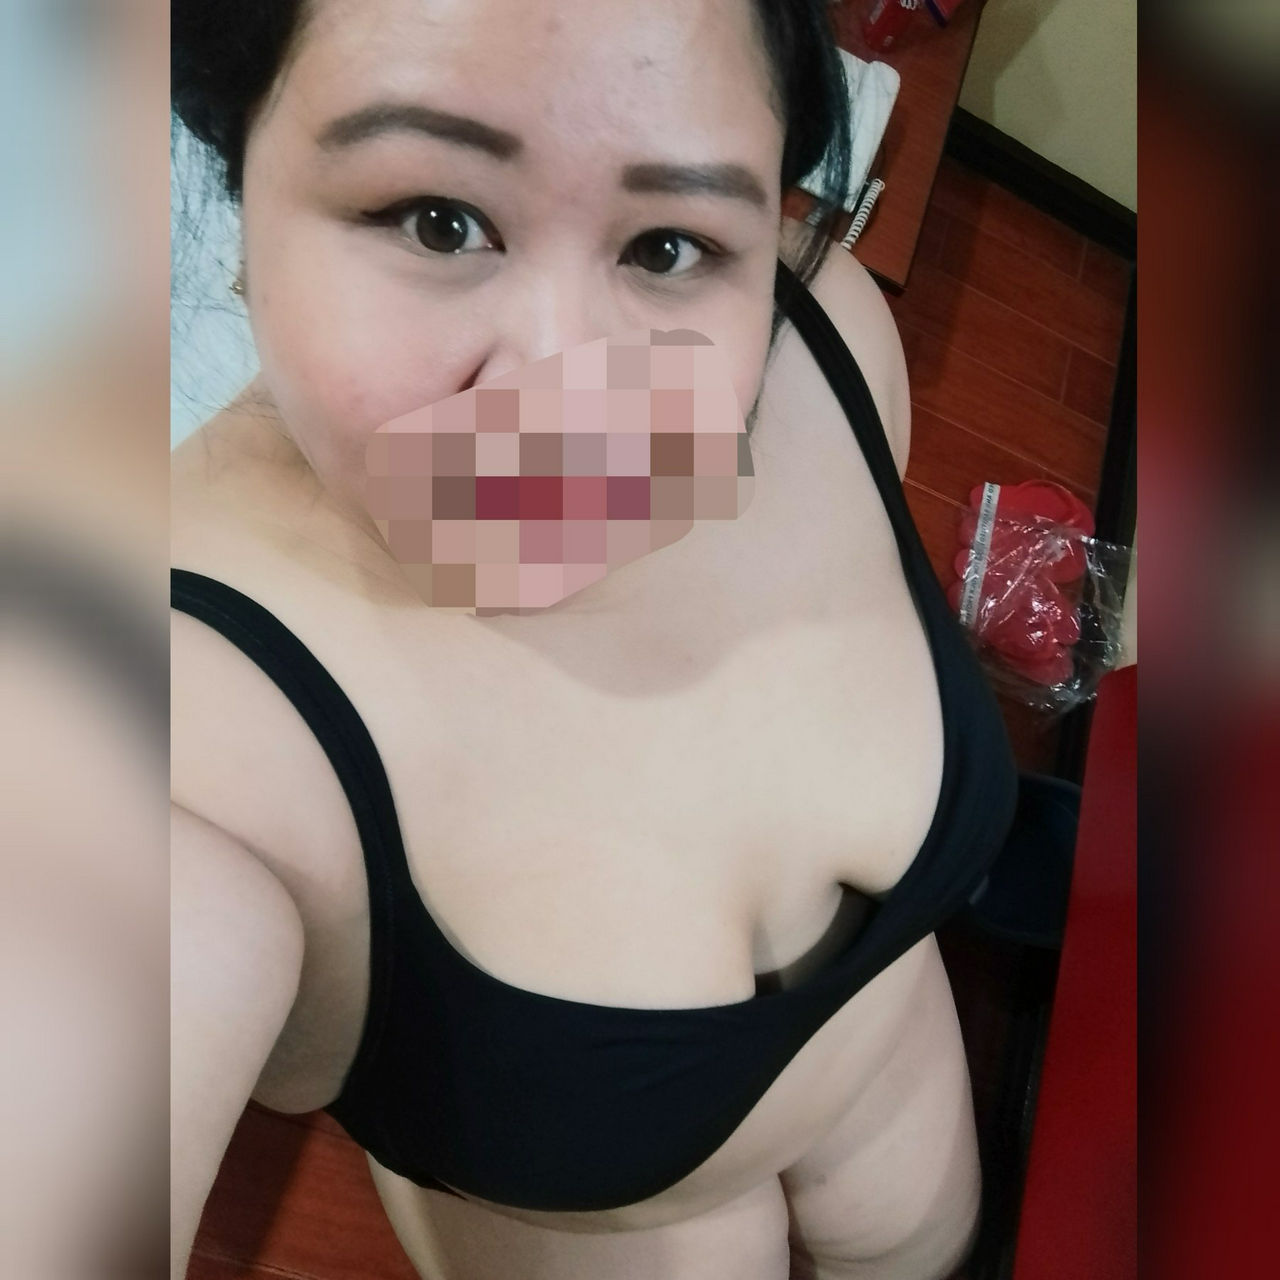 Pretty Chubby Engr /Sells Video Contents